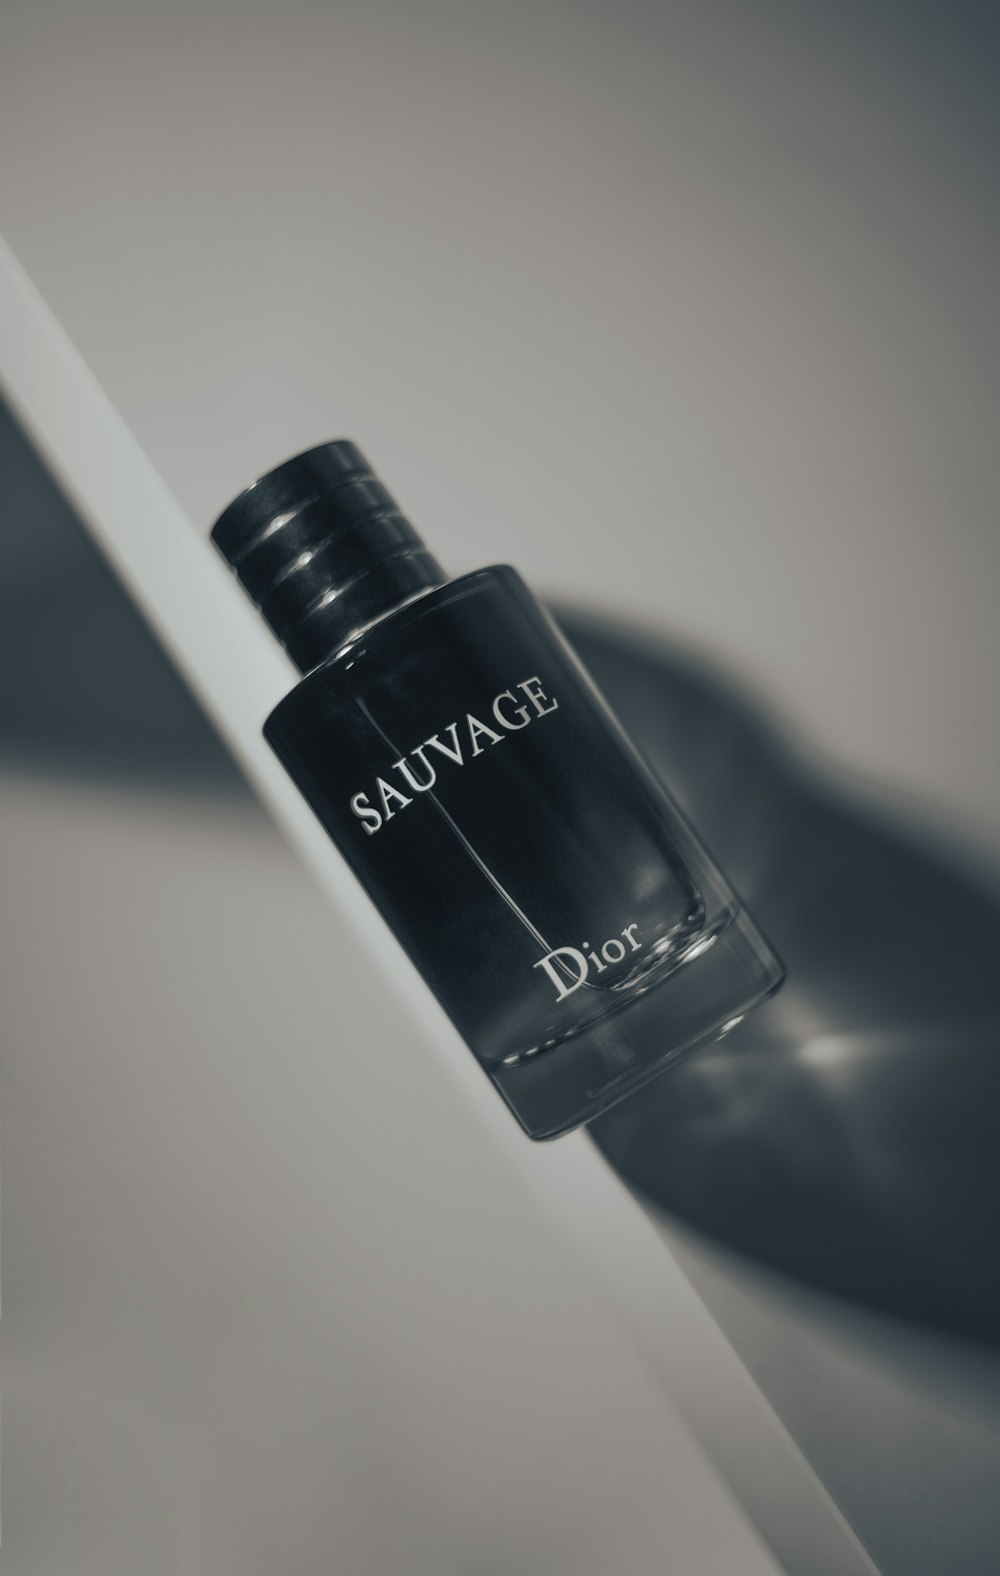 a black and silver bottle